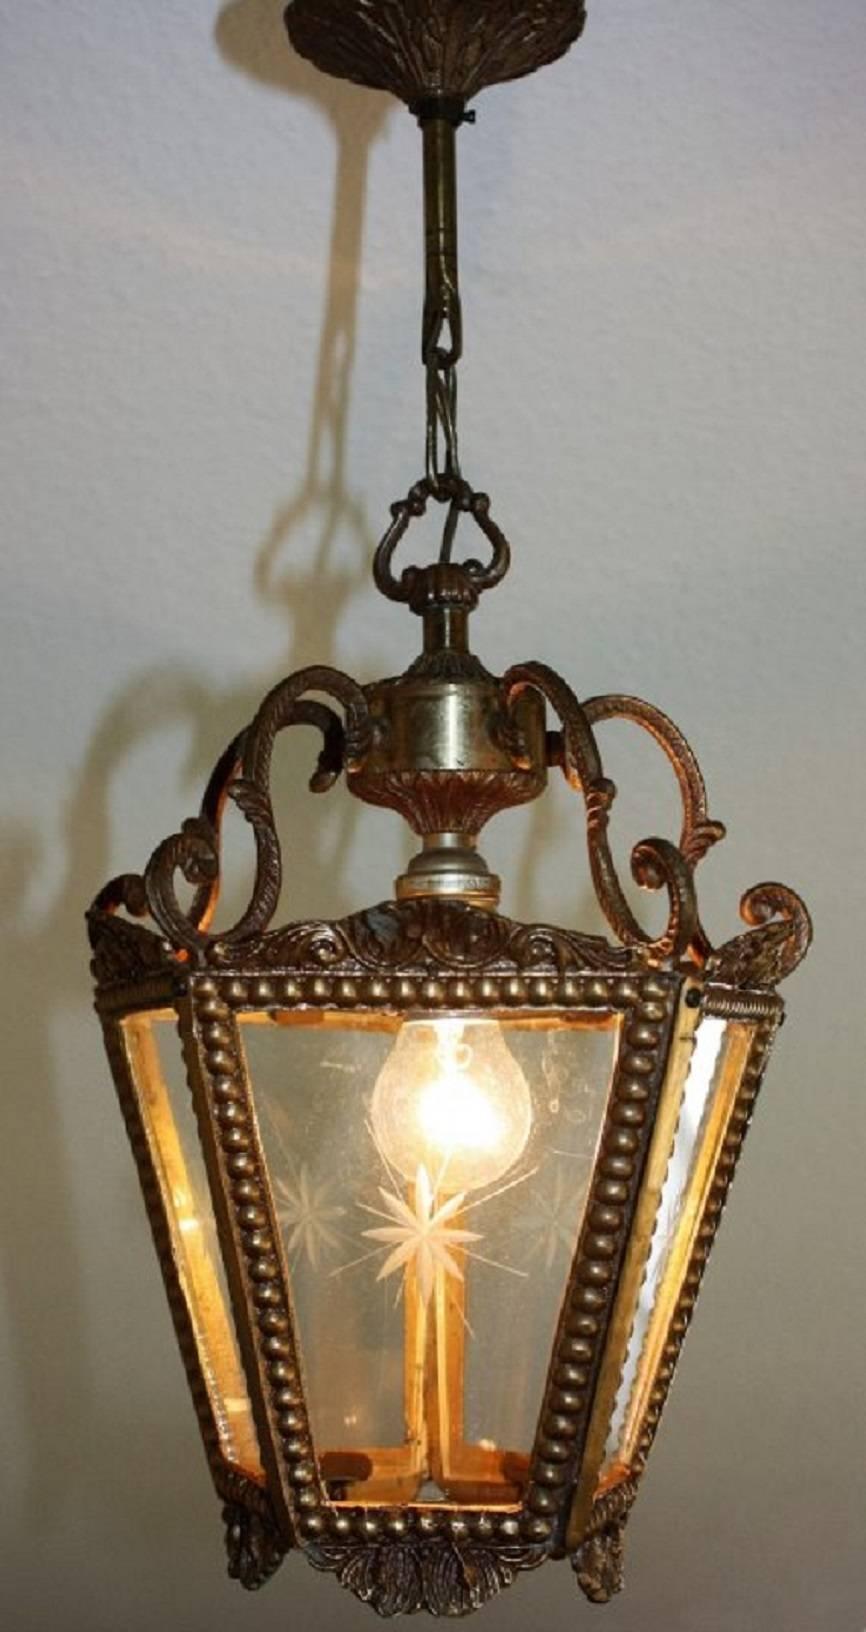 Elegant one-light brass and glass Lantern, circa 1960s.
Socket: one x E27 for standard screw bulbs.
Excellent condition.

